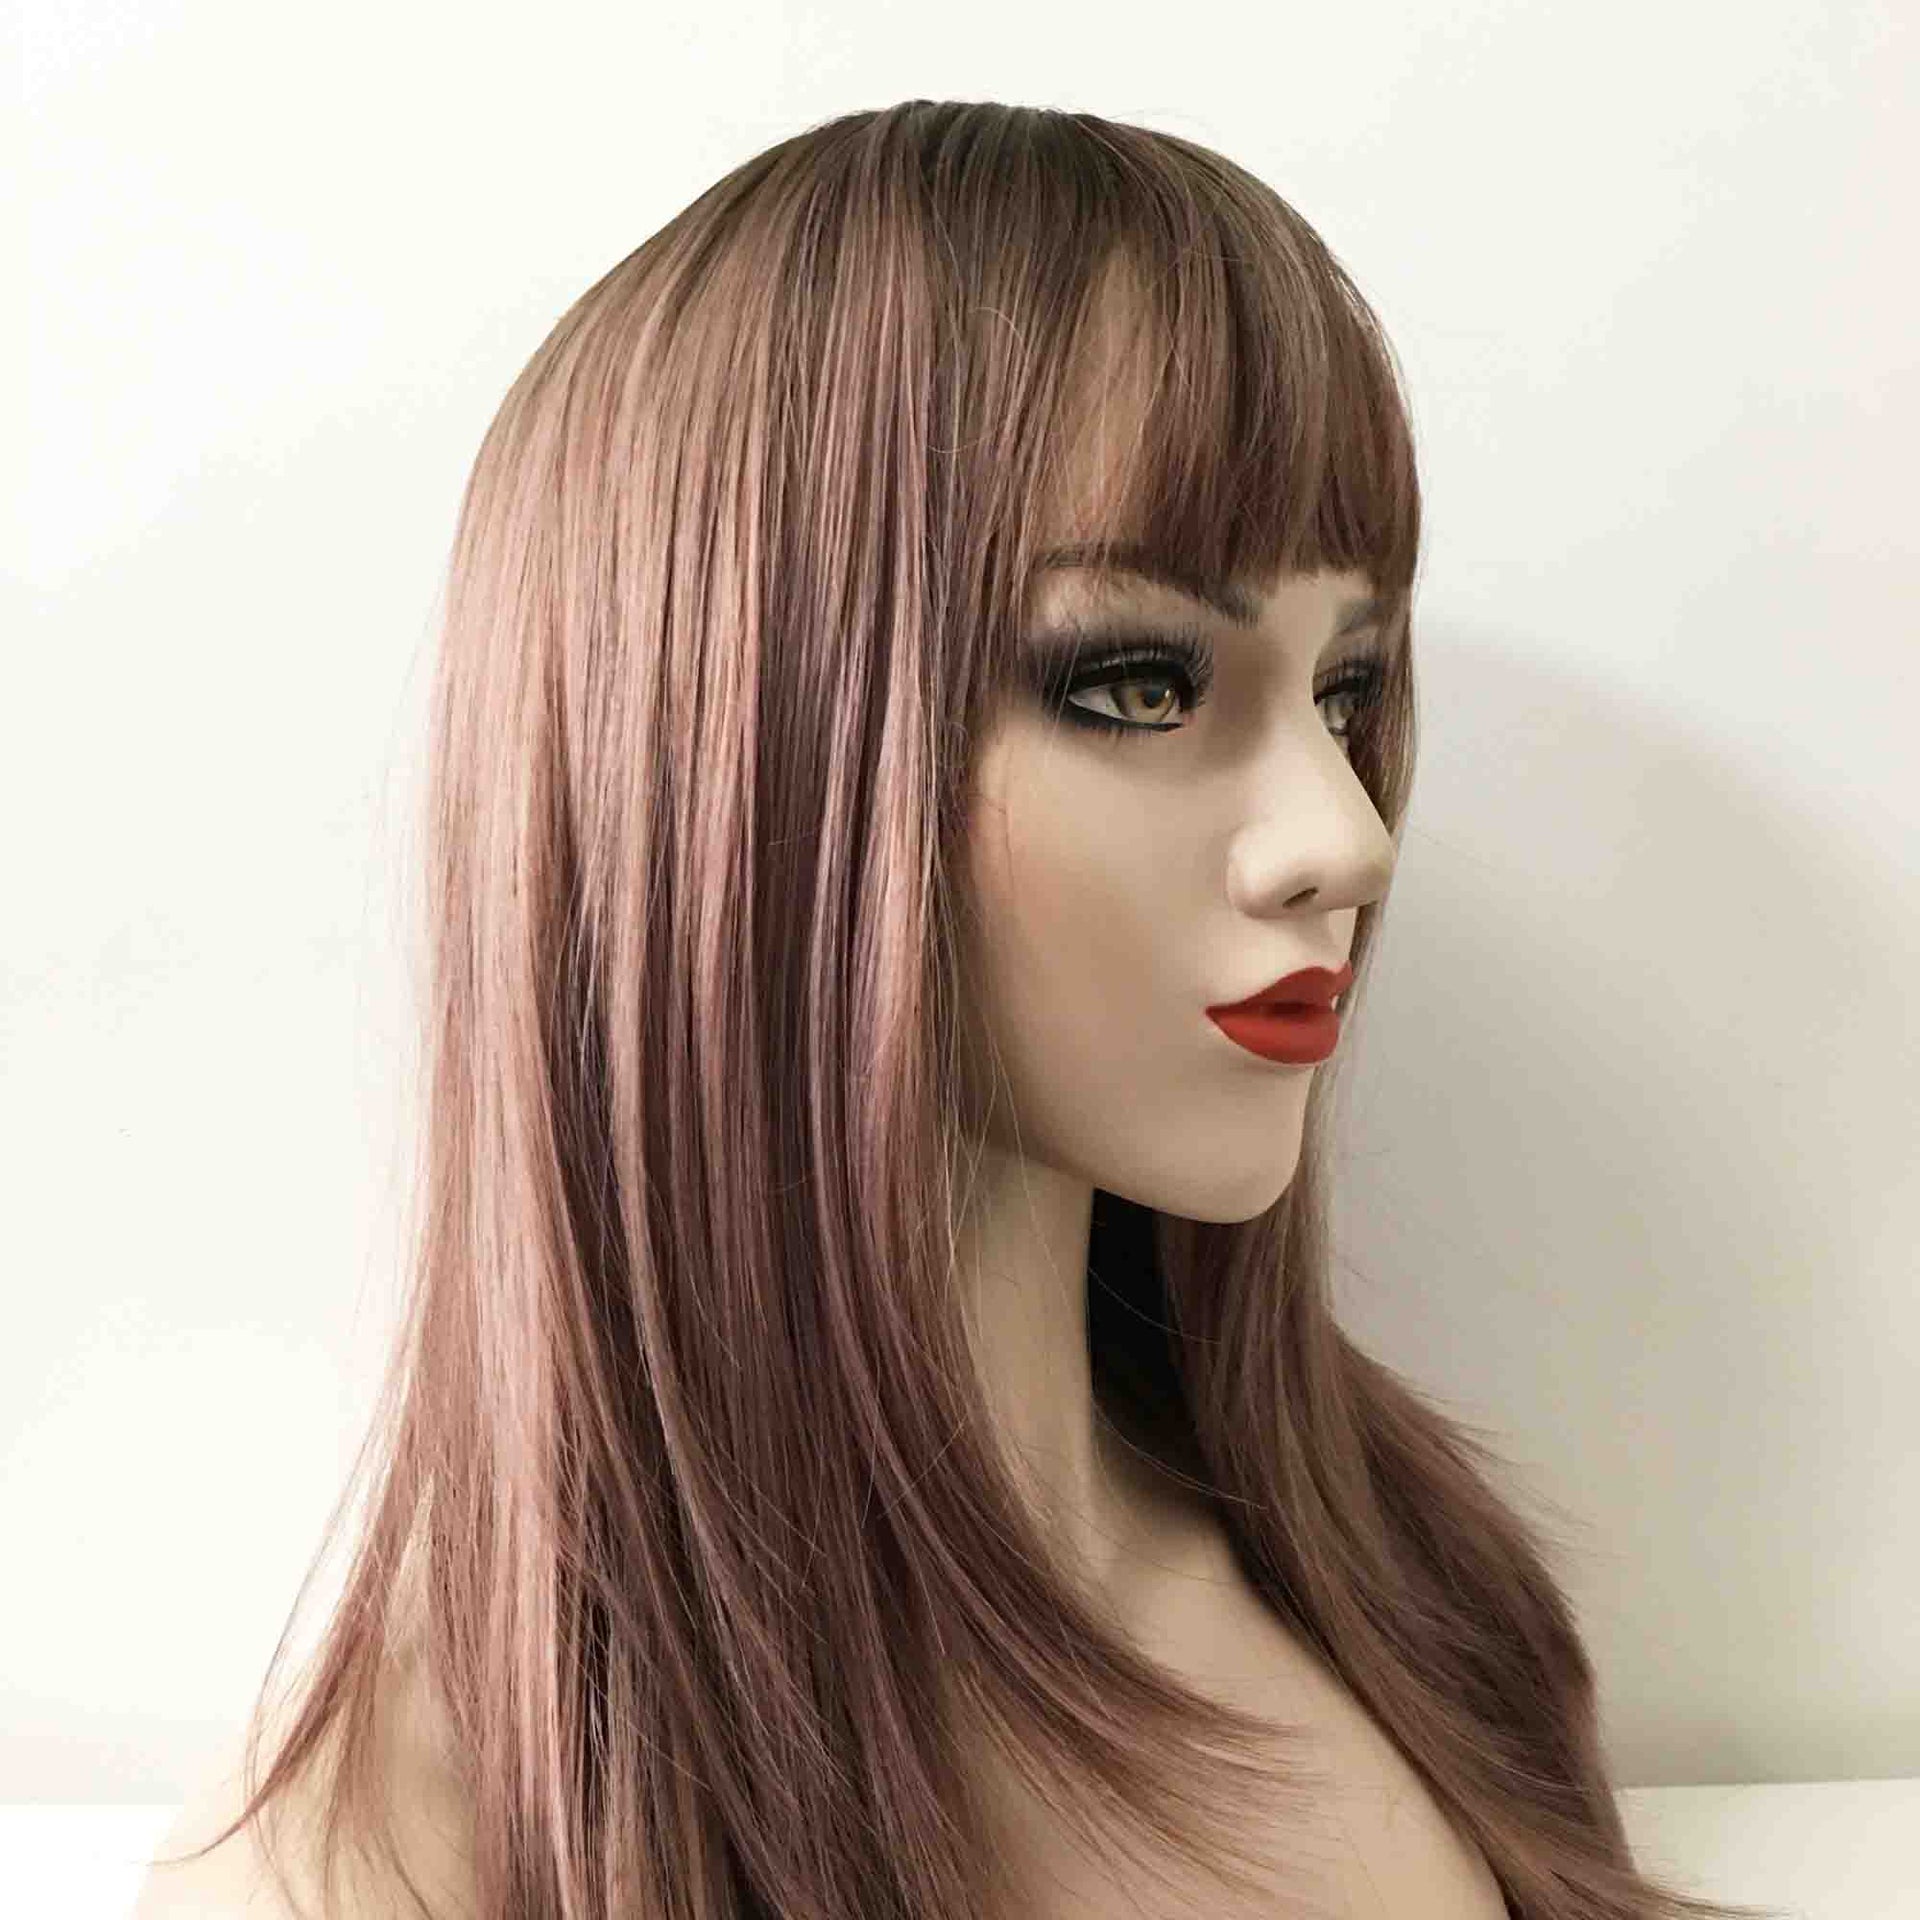 nevermindyrhead Women Dusty Pink Ombre Long Straight Fringe Bangs Layered Wig